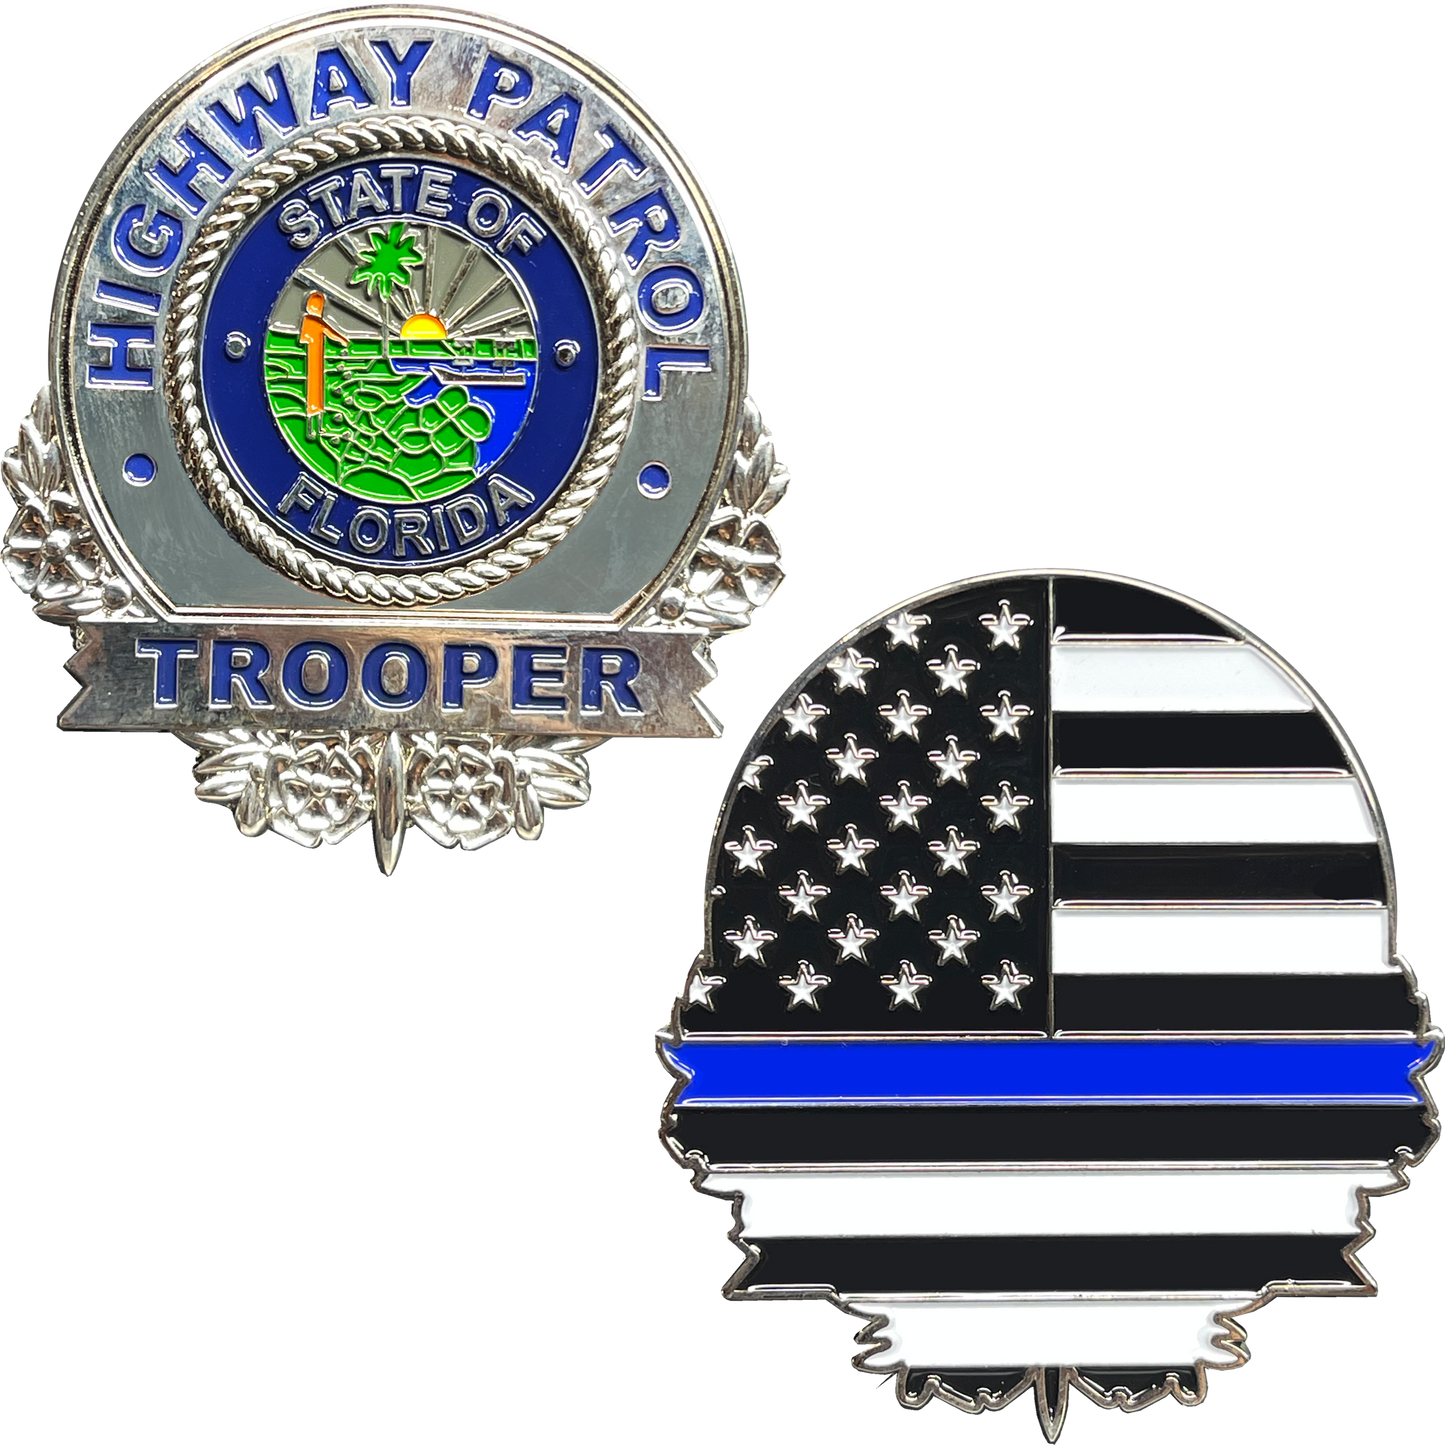 BL16-009 FHP Florida Highway Patrol Trooper Thin Blue Line Police Challenge Coin